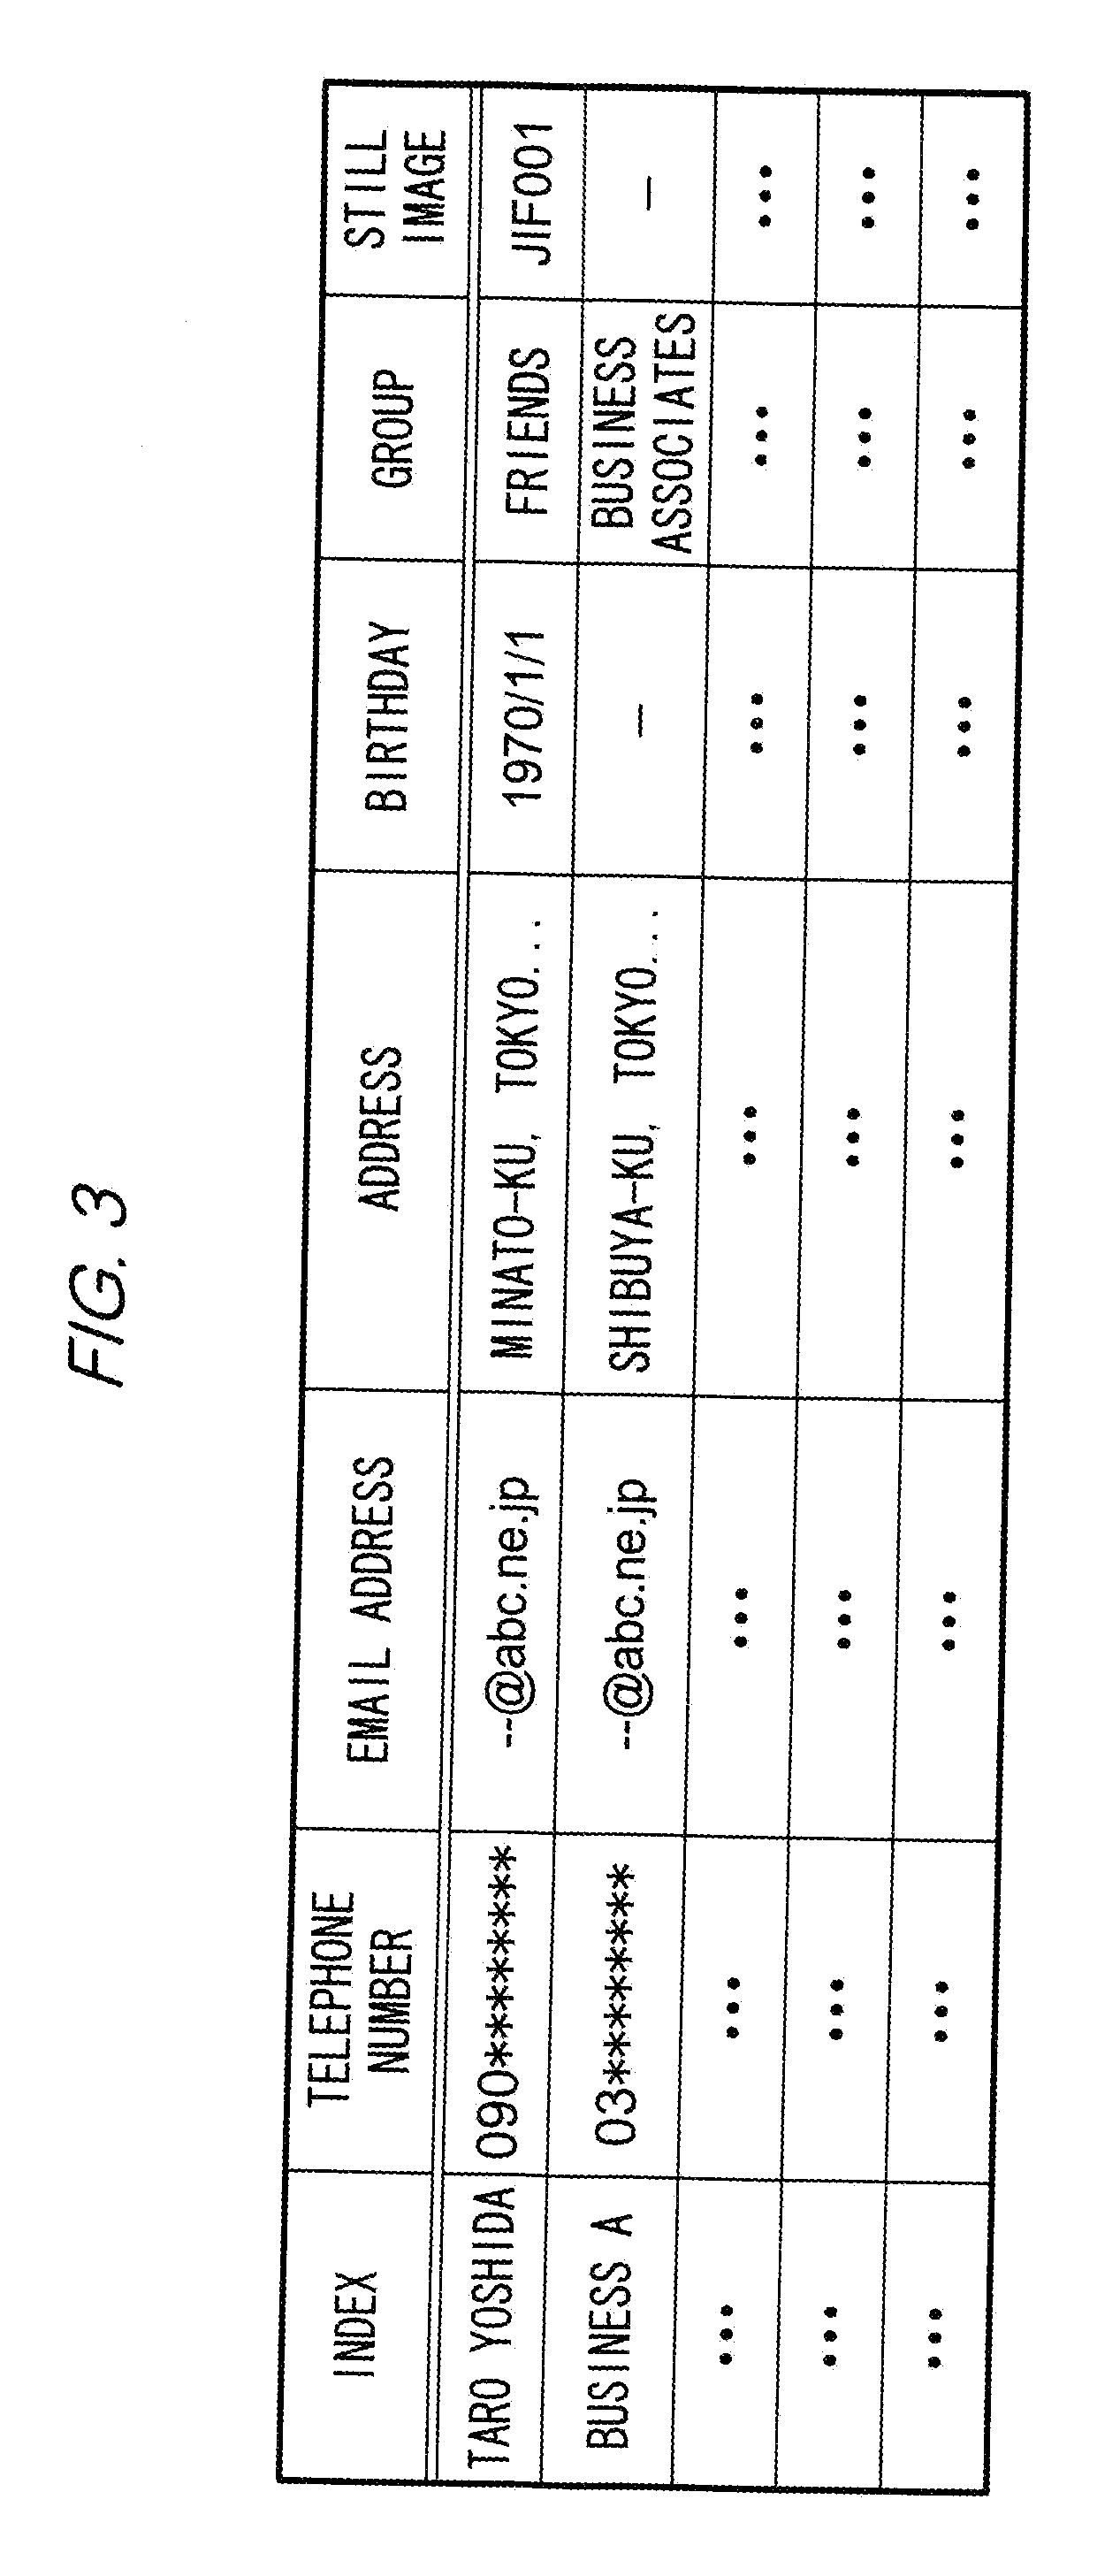 System and method for generating a graphical user interface